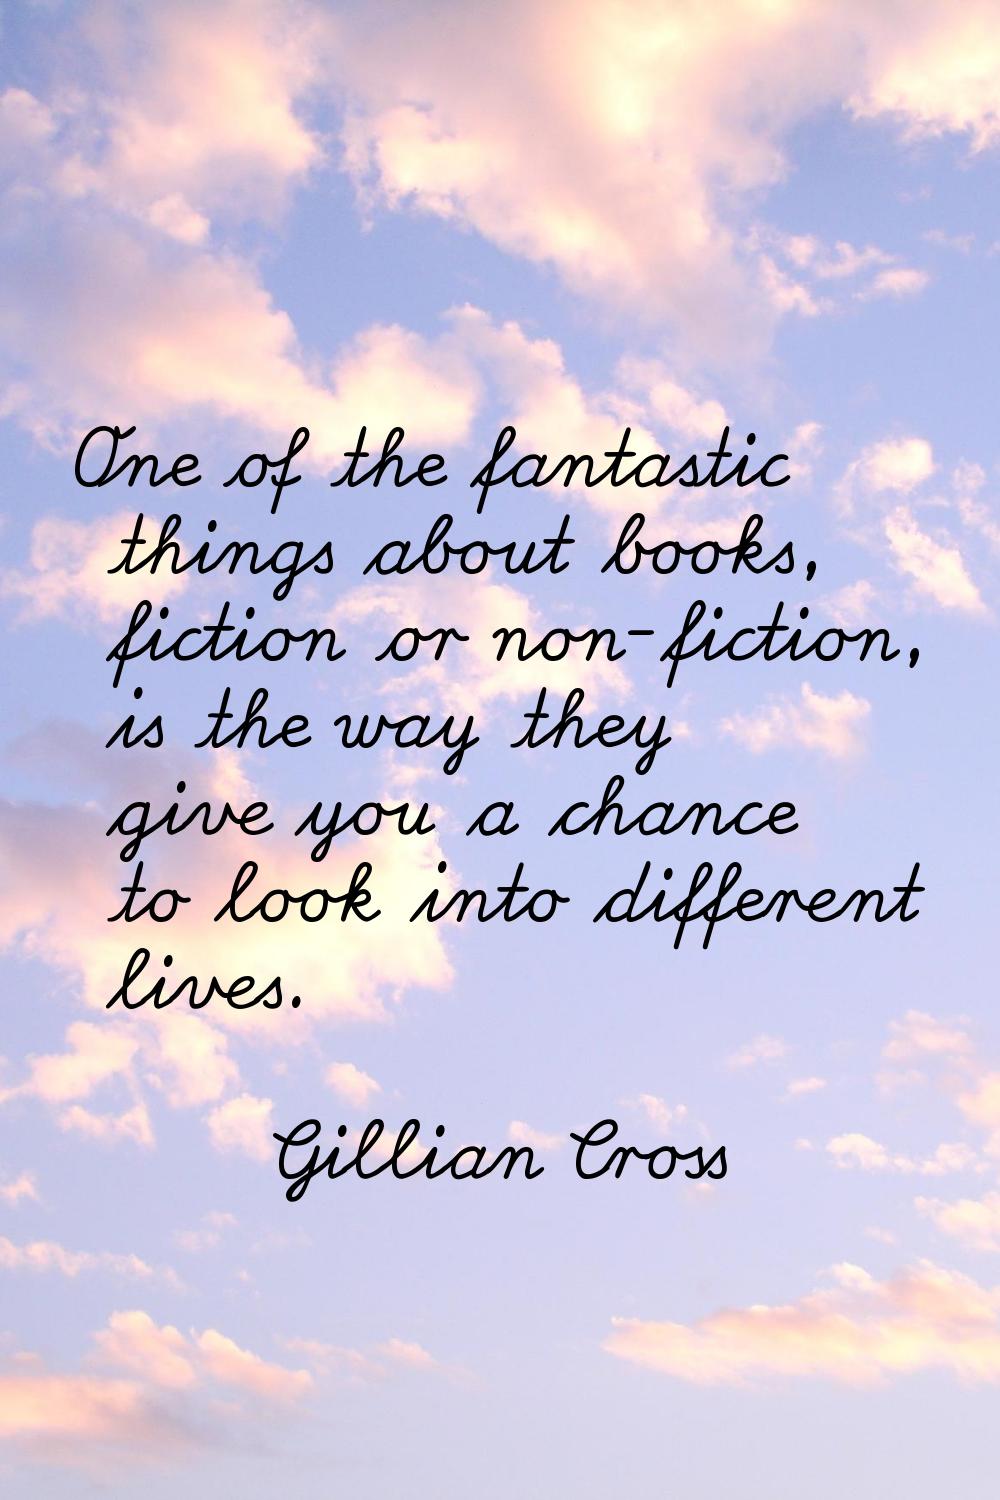 One of the fantastic things about books, fiction or non-fiction, is the way they give you a chance 